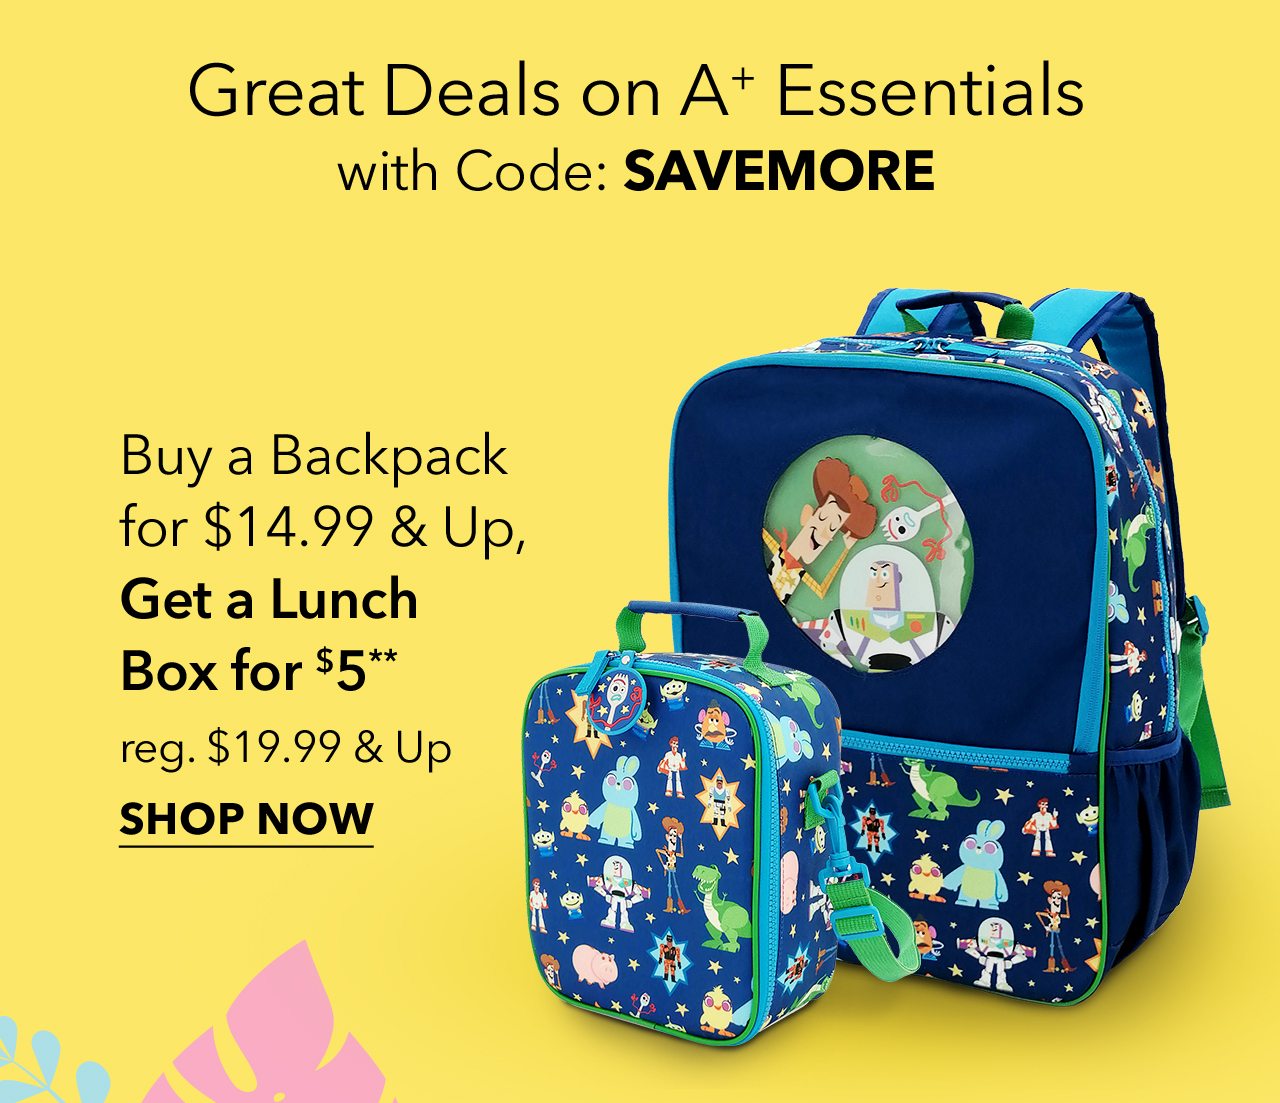 Buy a Backpack for $14.99 & Up, Get a Lunch Box for $5 | Shop Now